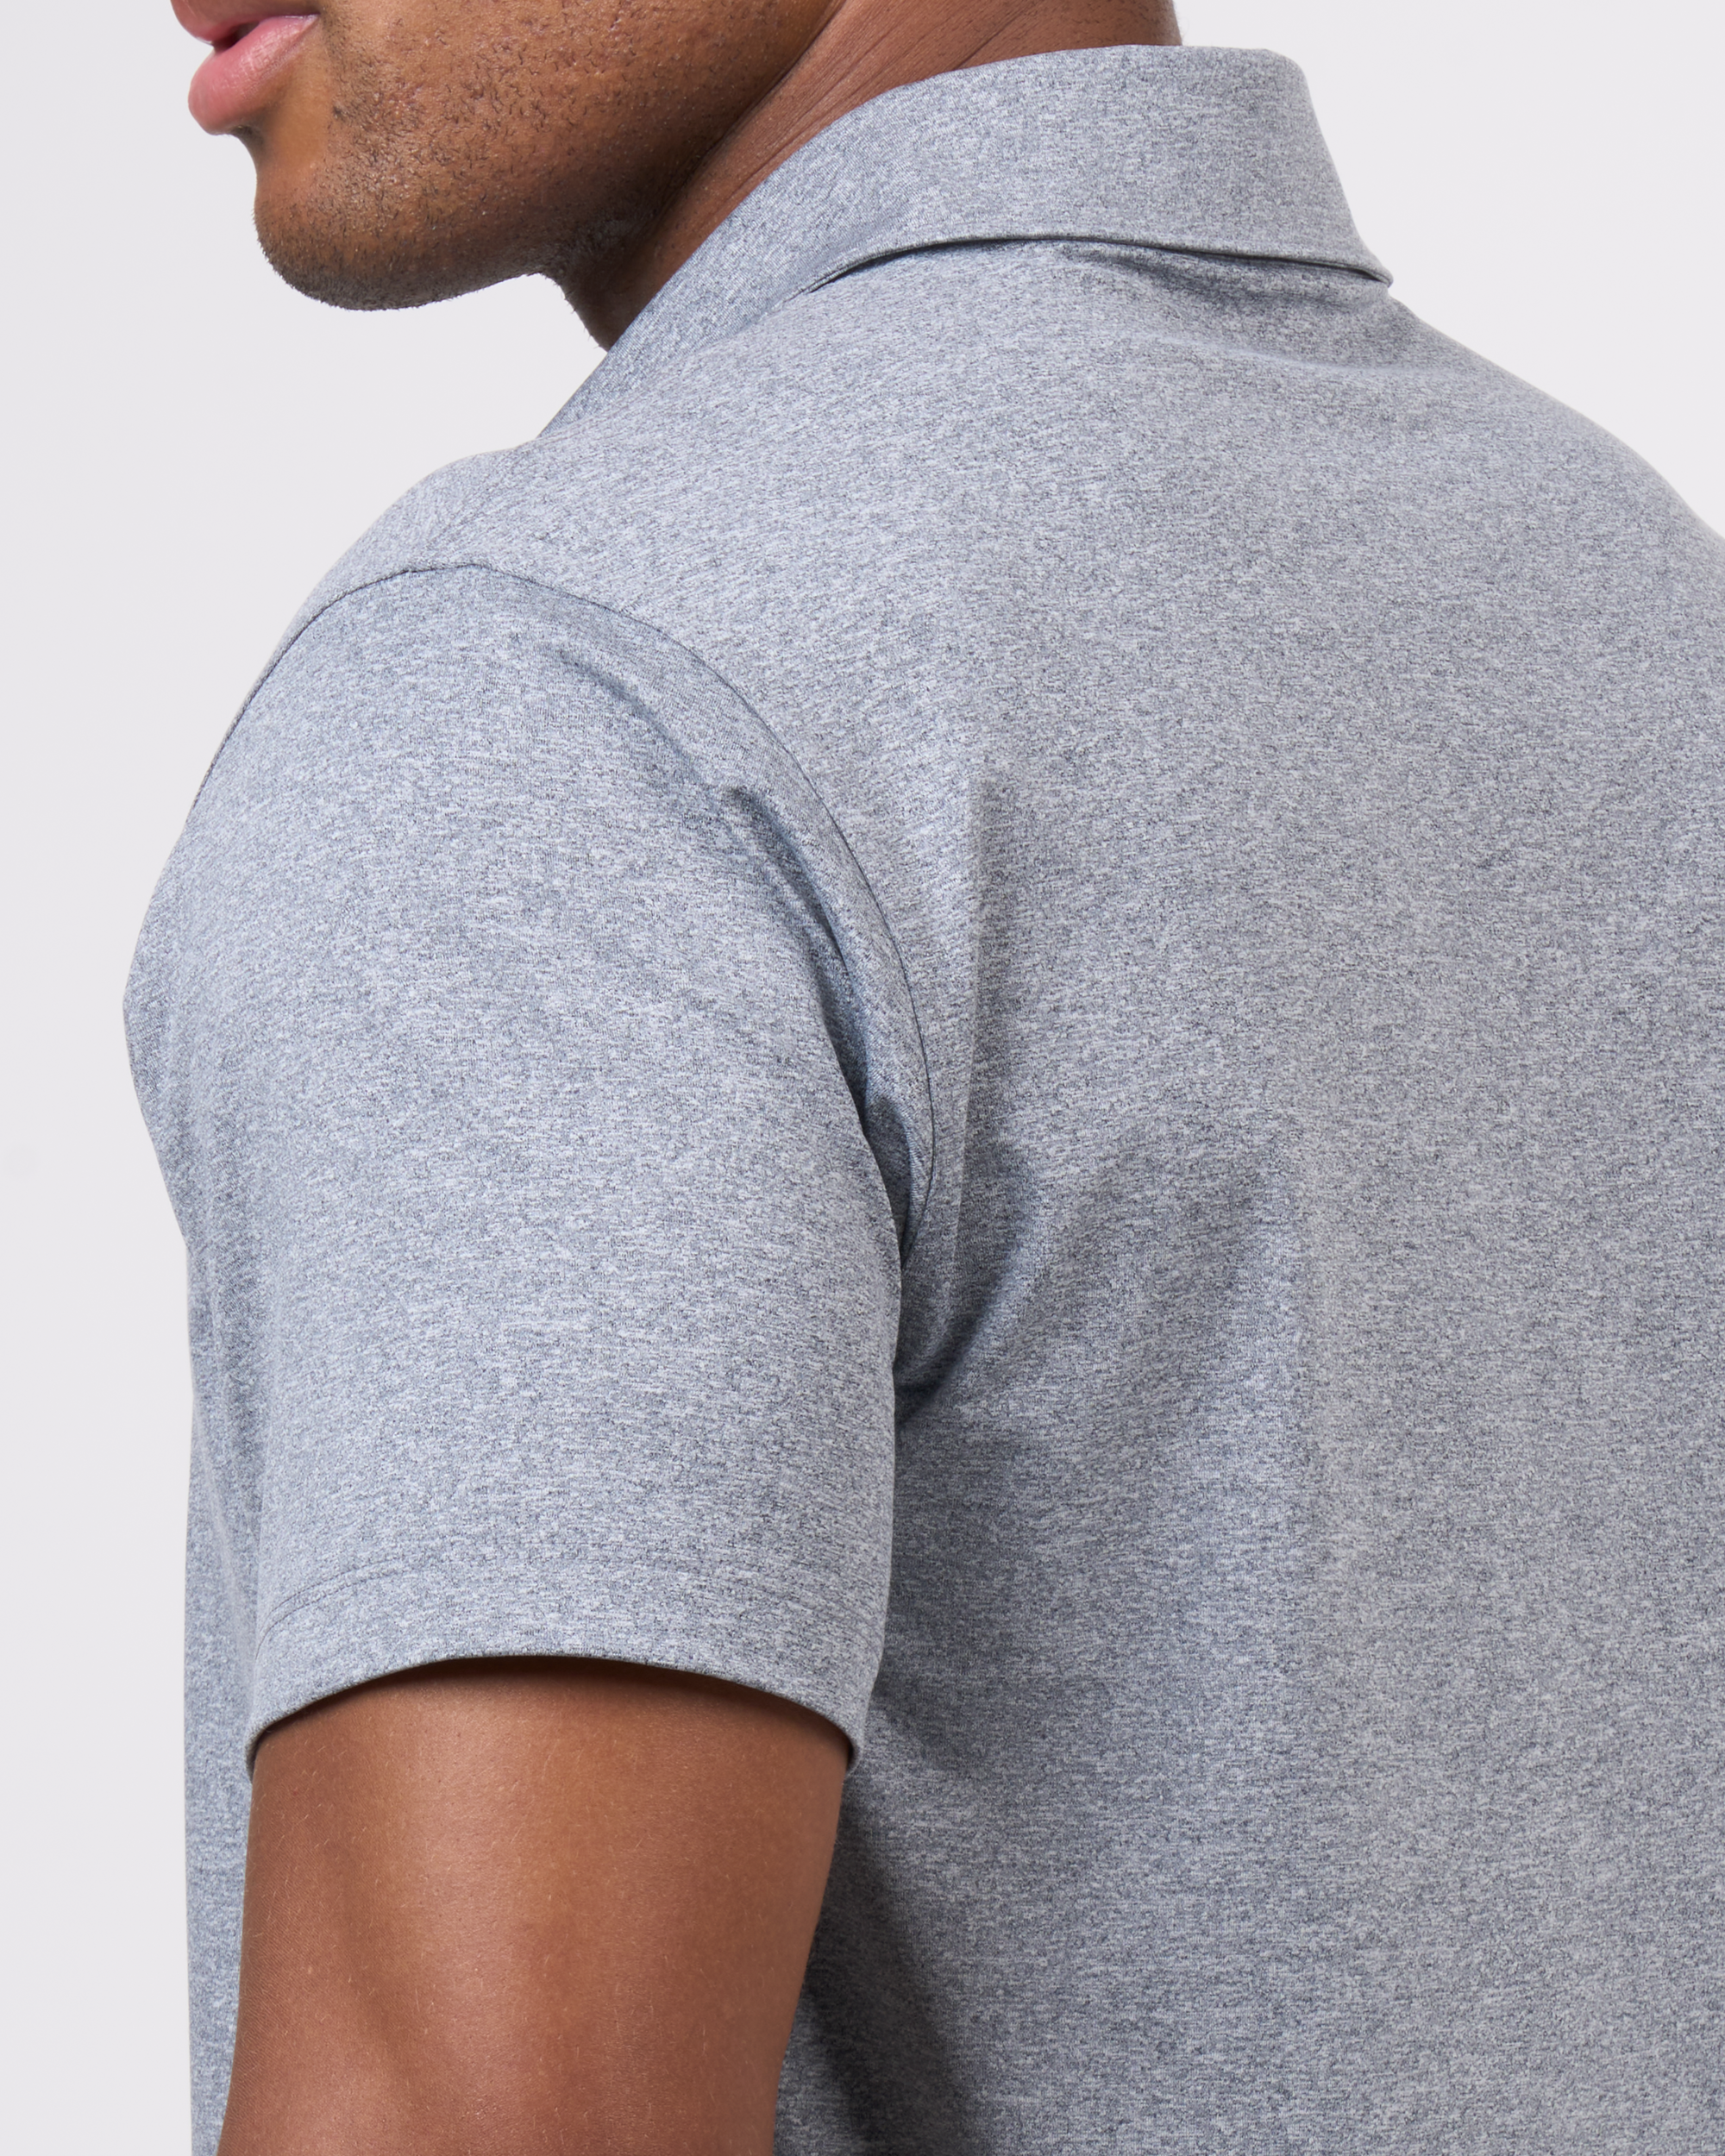 Foreign Rider Co Technical Fabric Grey Polo Shoulder Detail